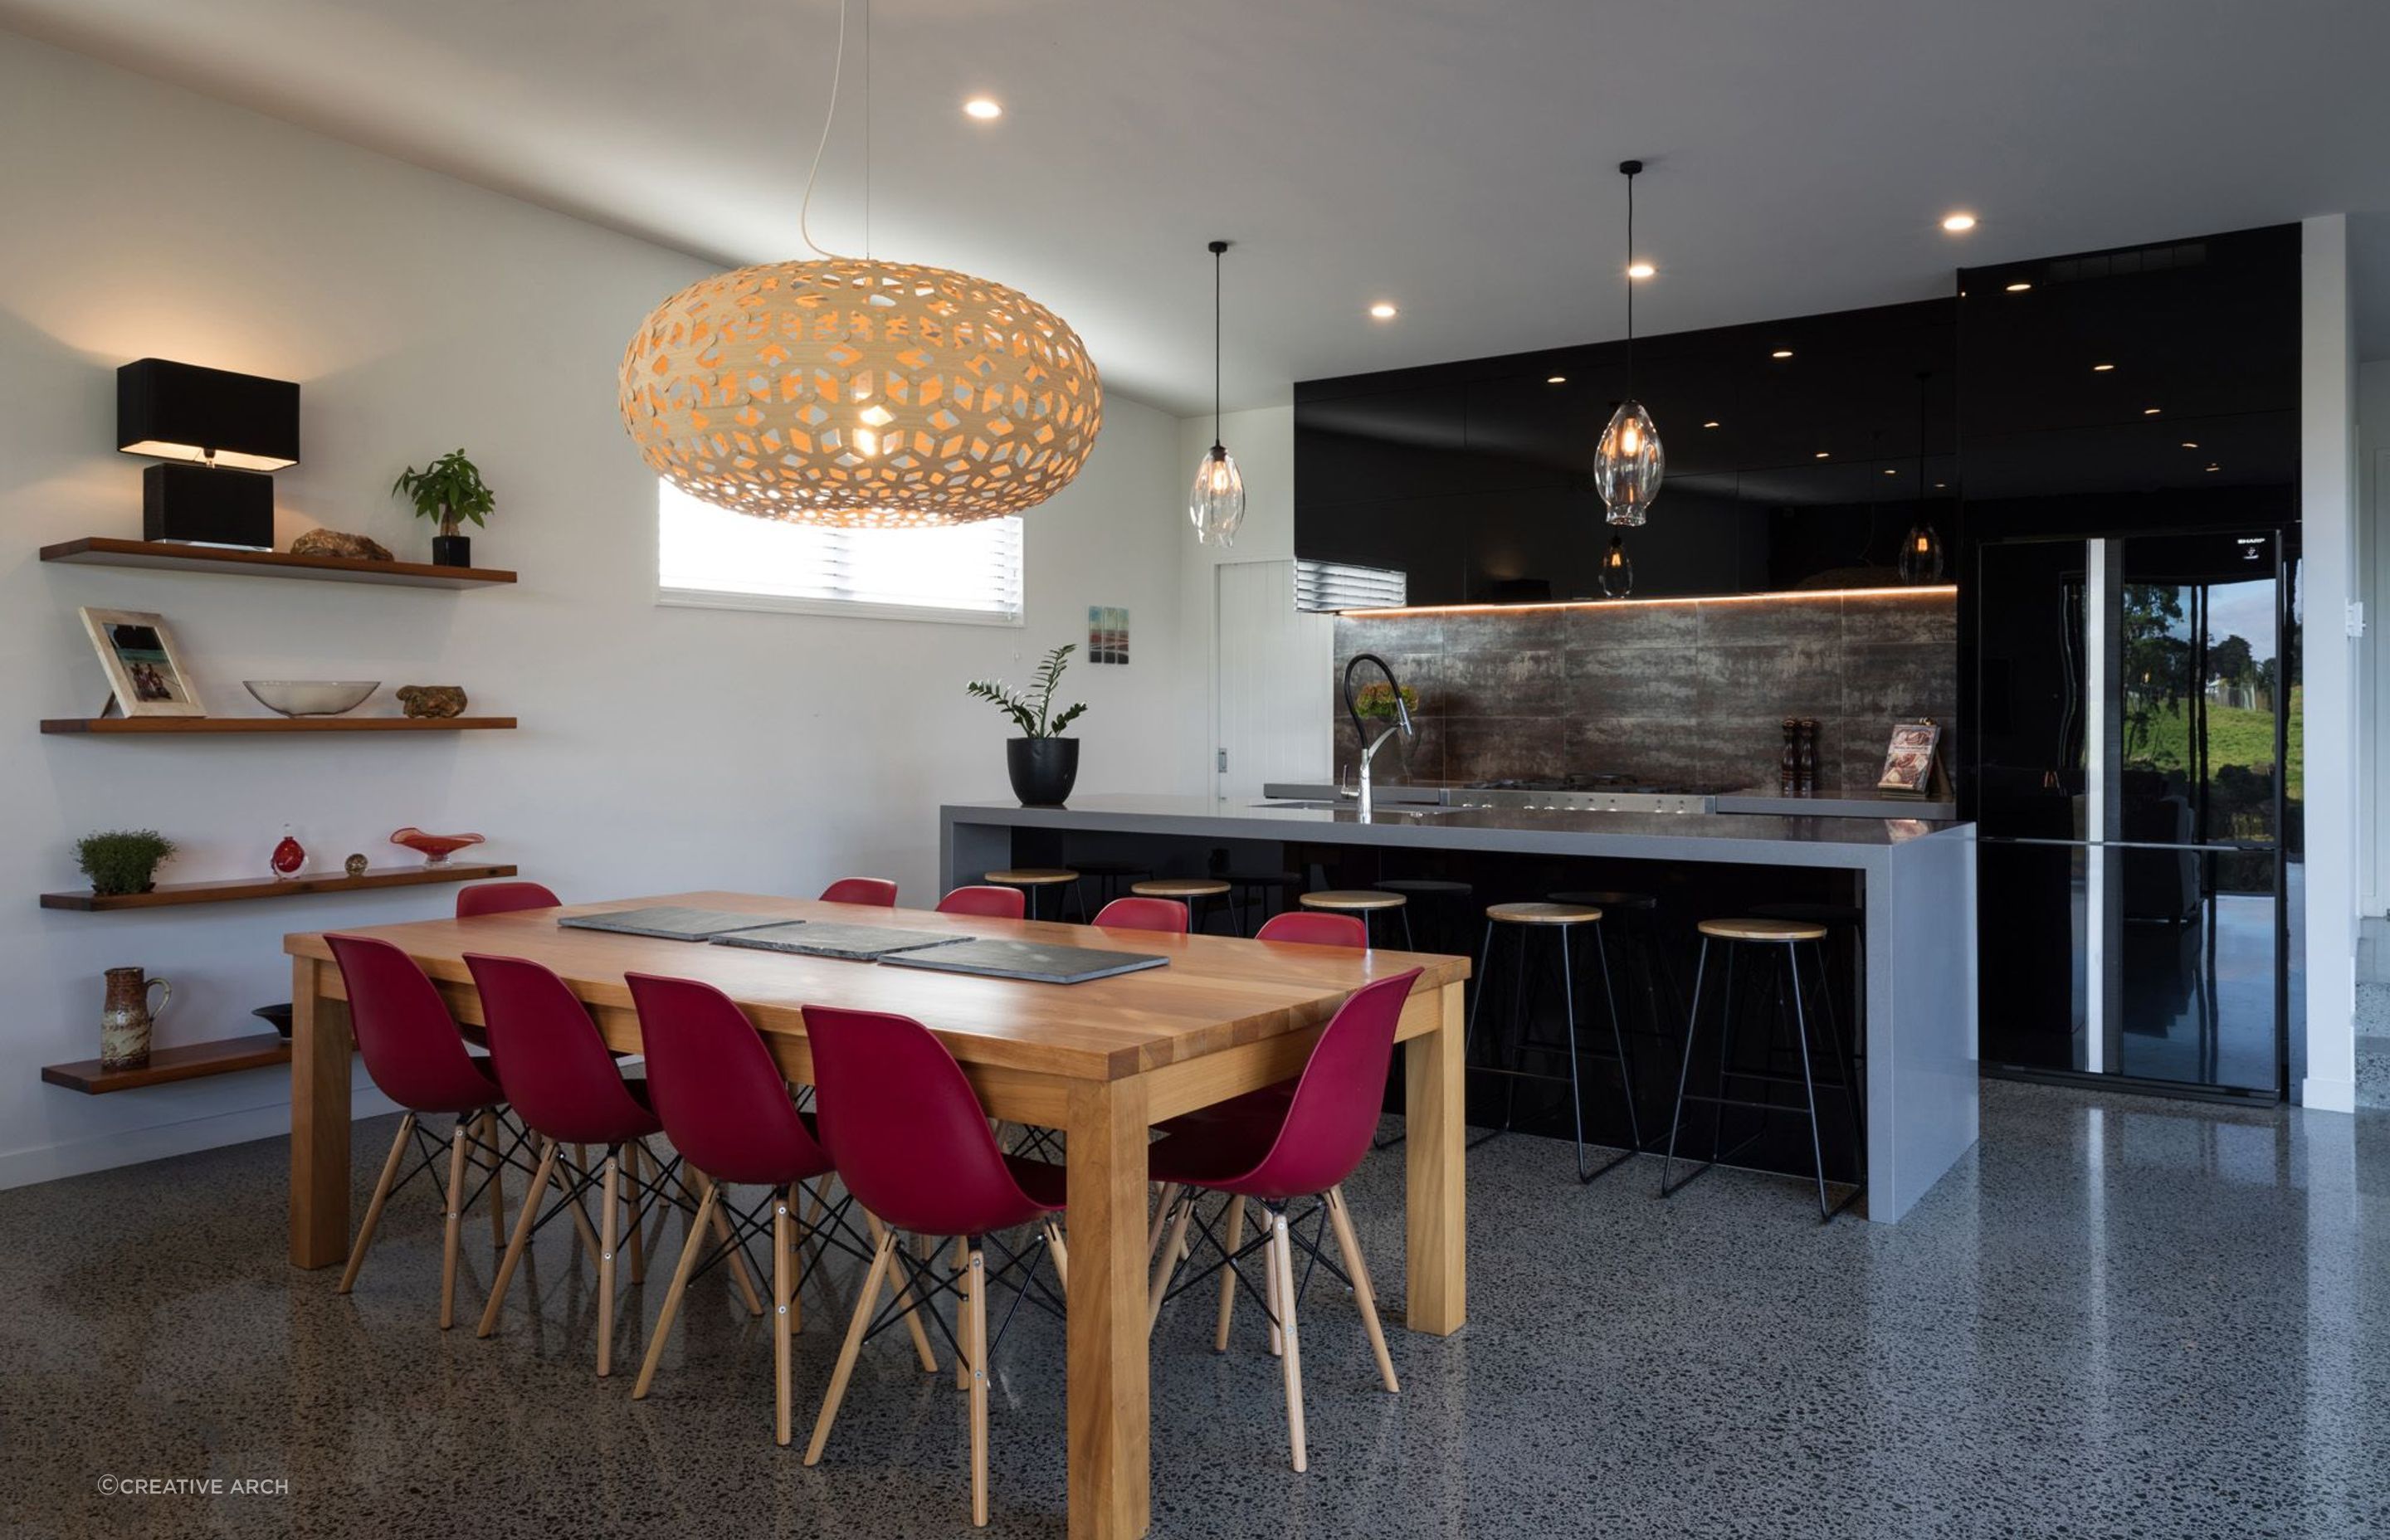 A concrete slab and polished floors with high thermal mass help the home absorb energy from the sun. Photo: Mark Scowen.